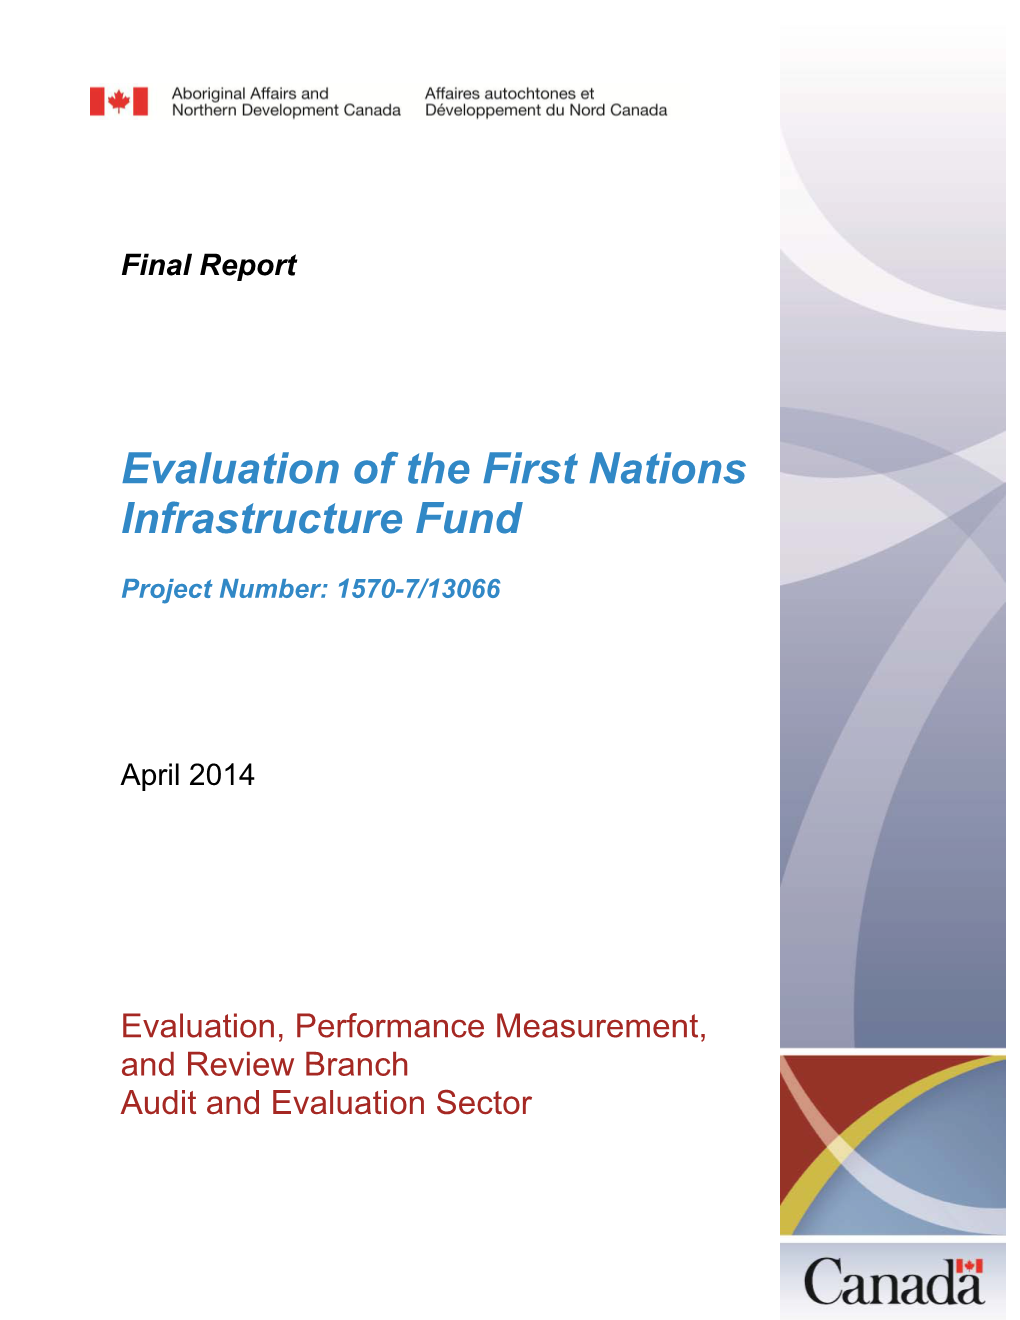 Evaluation of the First Nation Infrastructure Fund